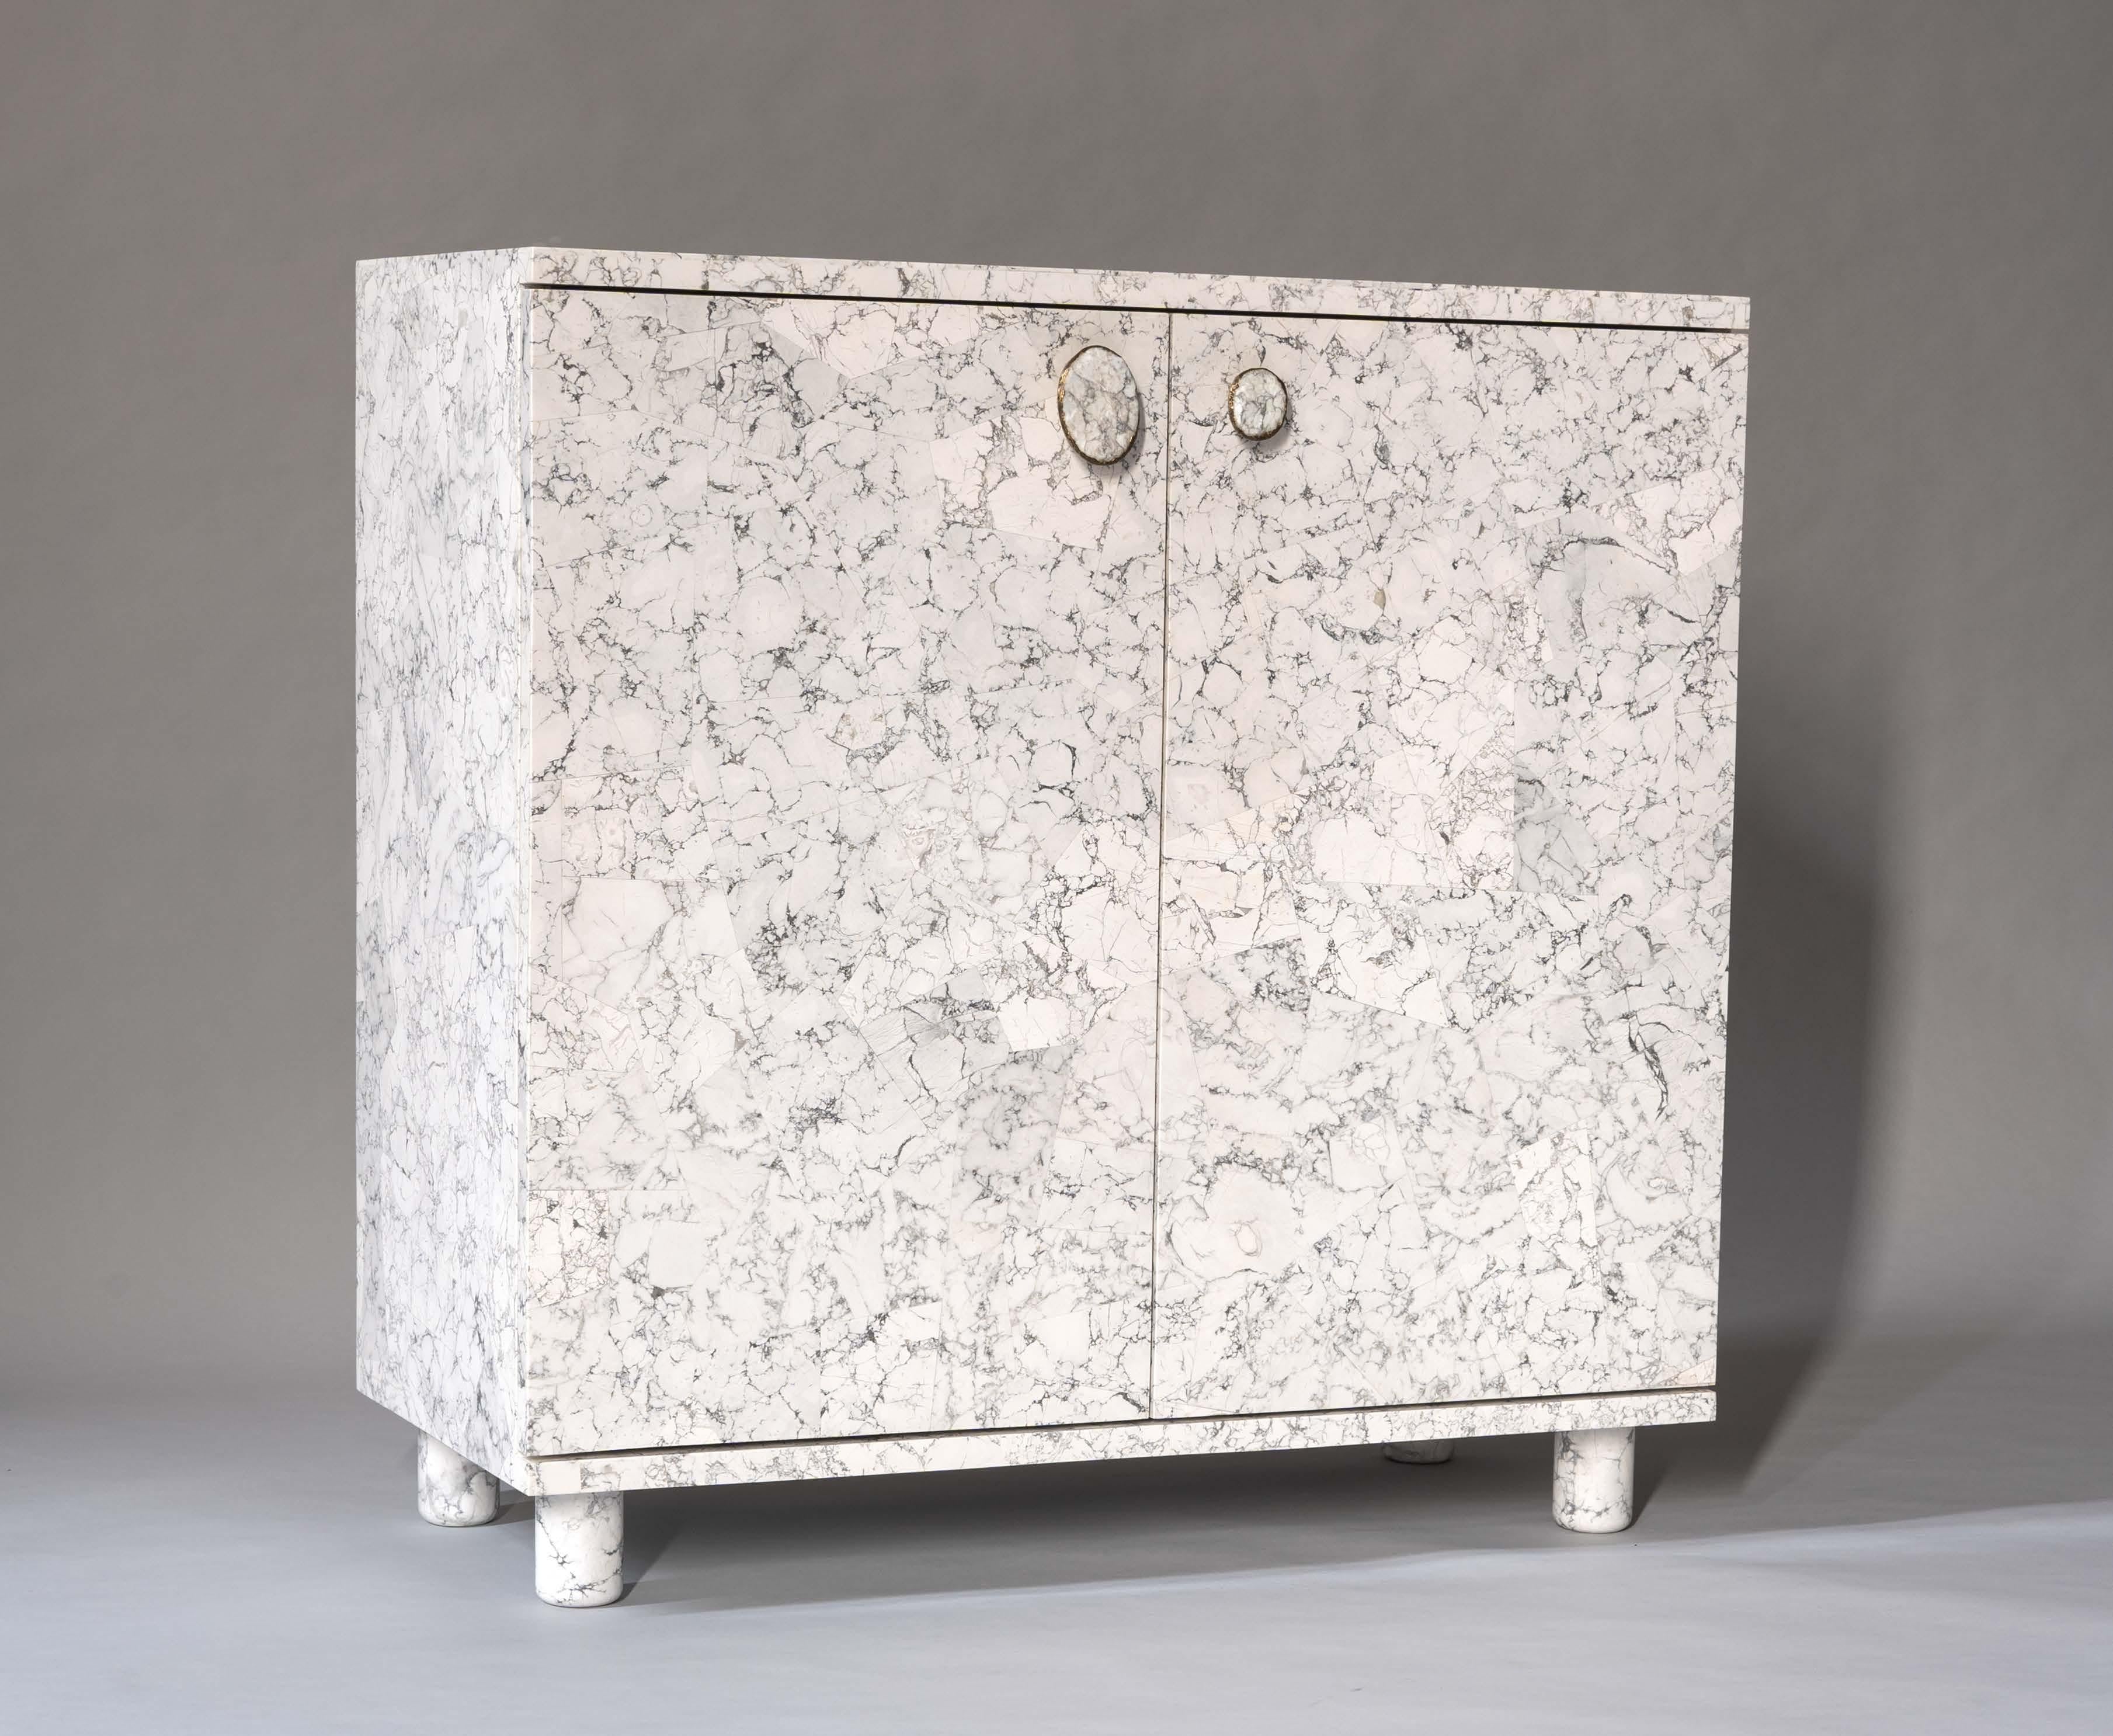 Part of our Gem Collection, the Gem Low Cabinet celebrates the beauty and variety of natural stone. The cabinet is fully encased in semi-precious stone marquetry, its linearity of form contrasted with irregularly shaped hand-cast solid antique